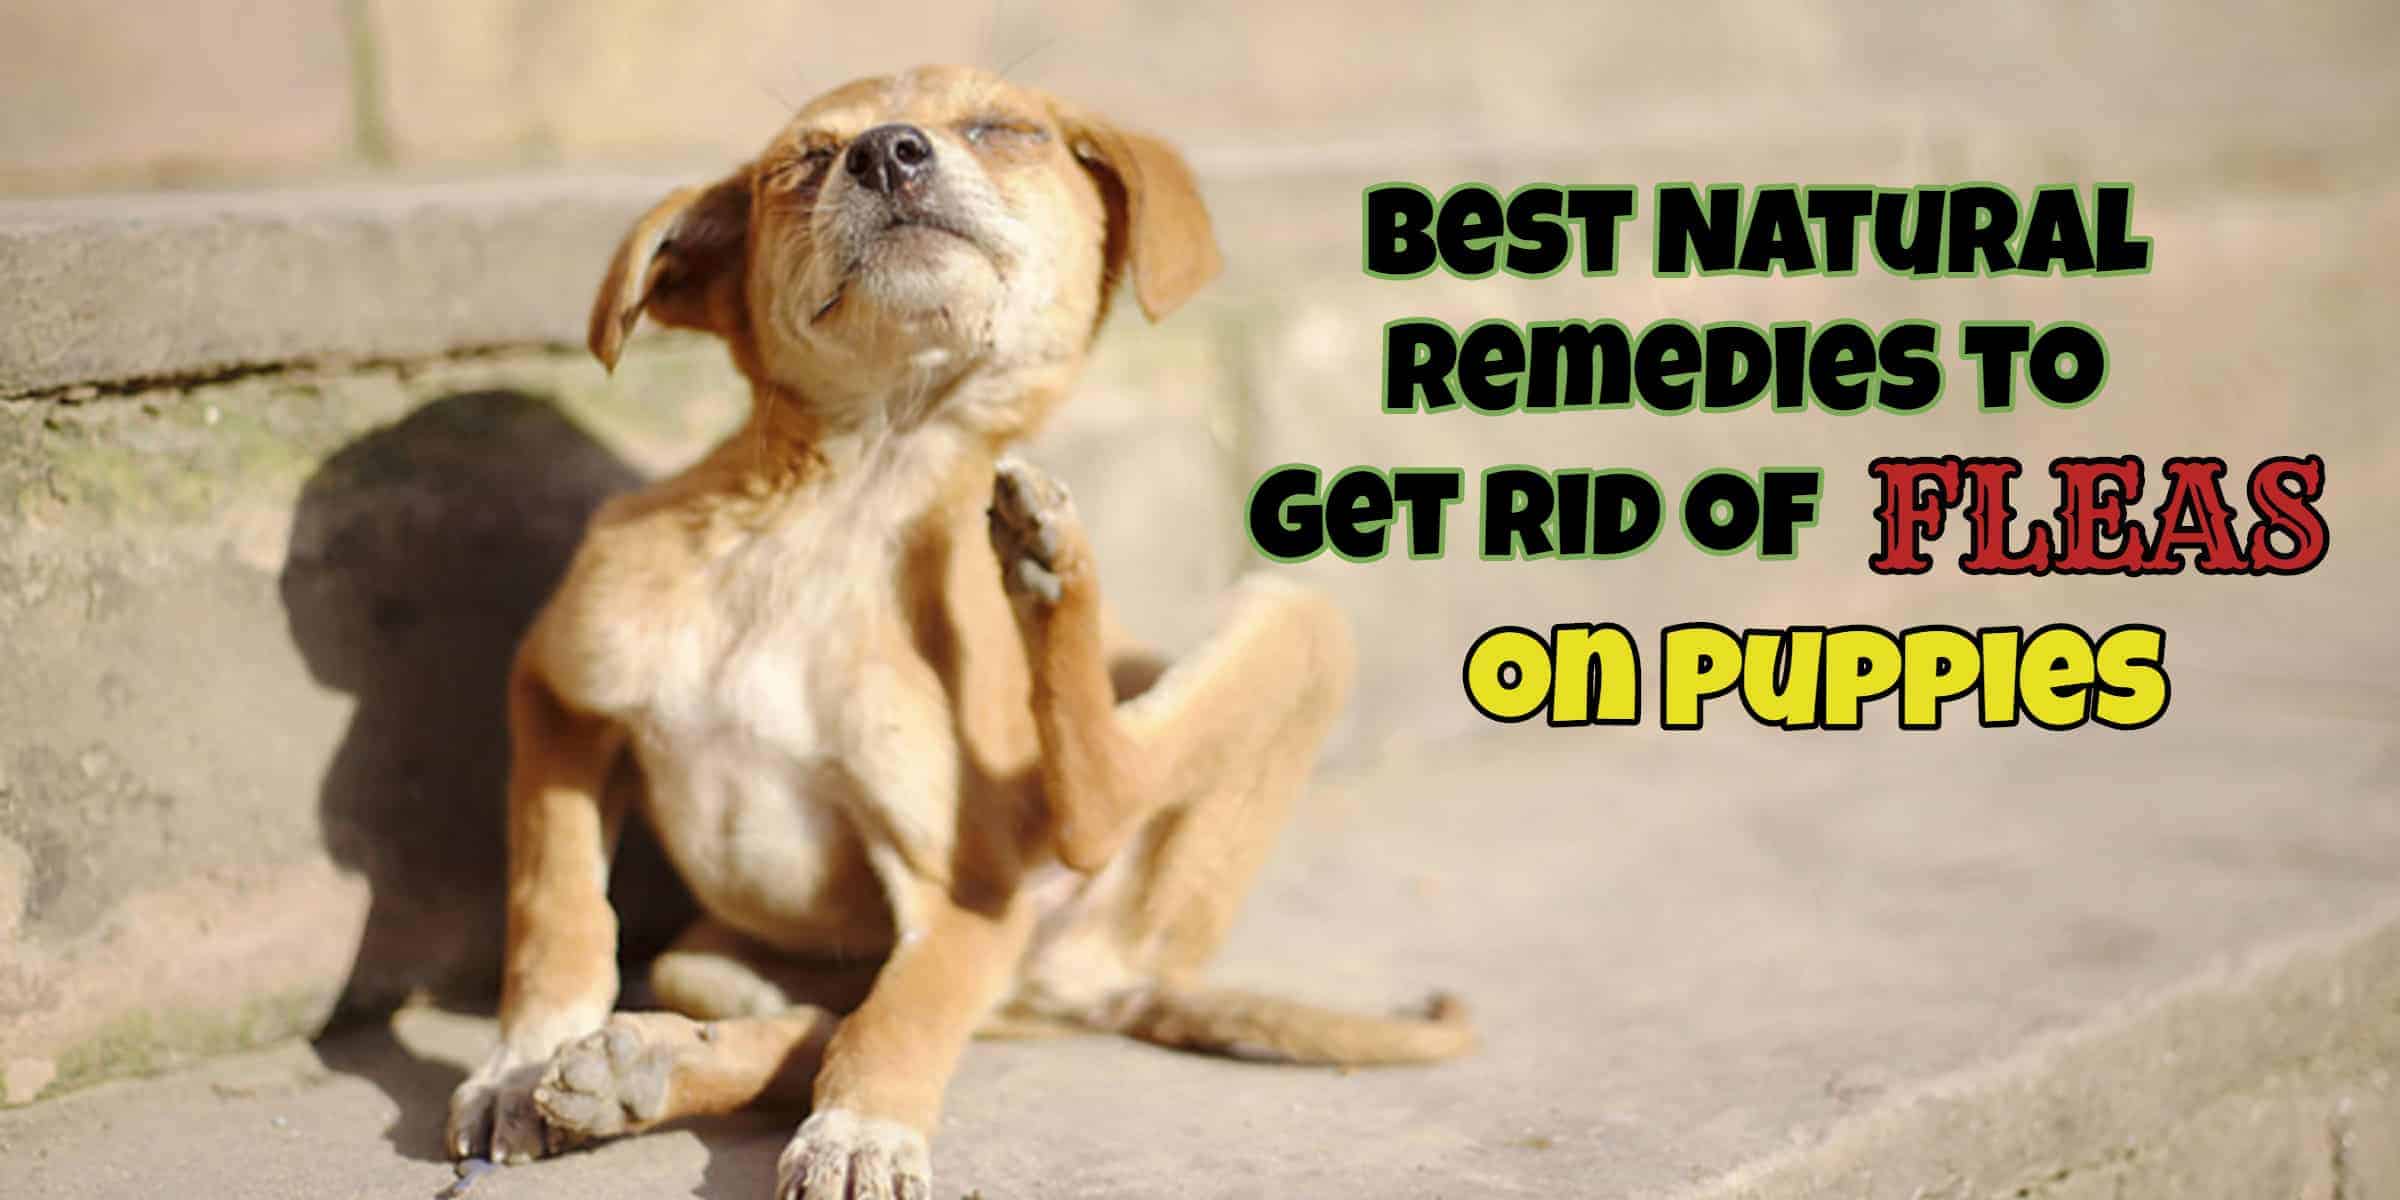 Best Natural Remedies to Get Rid of Fleas on Puppies